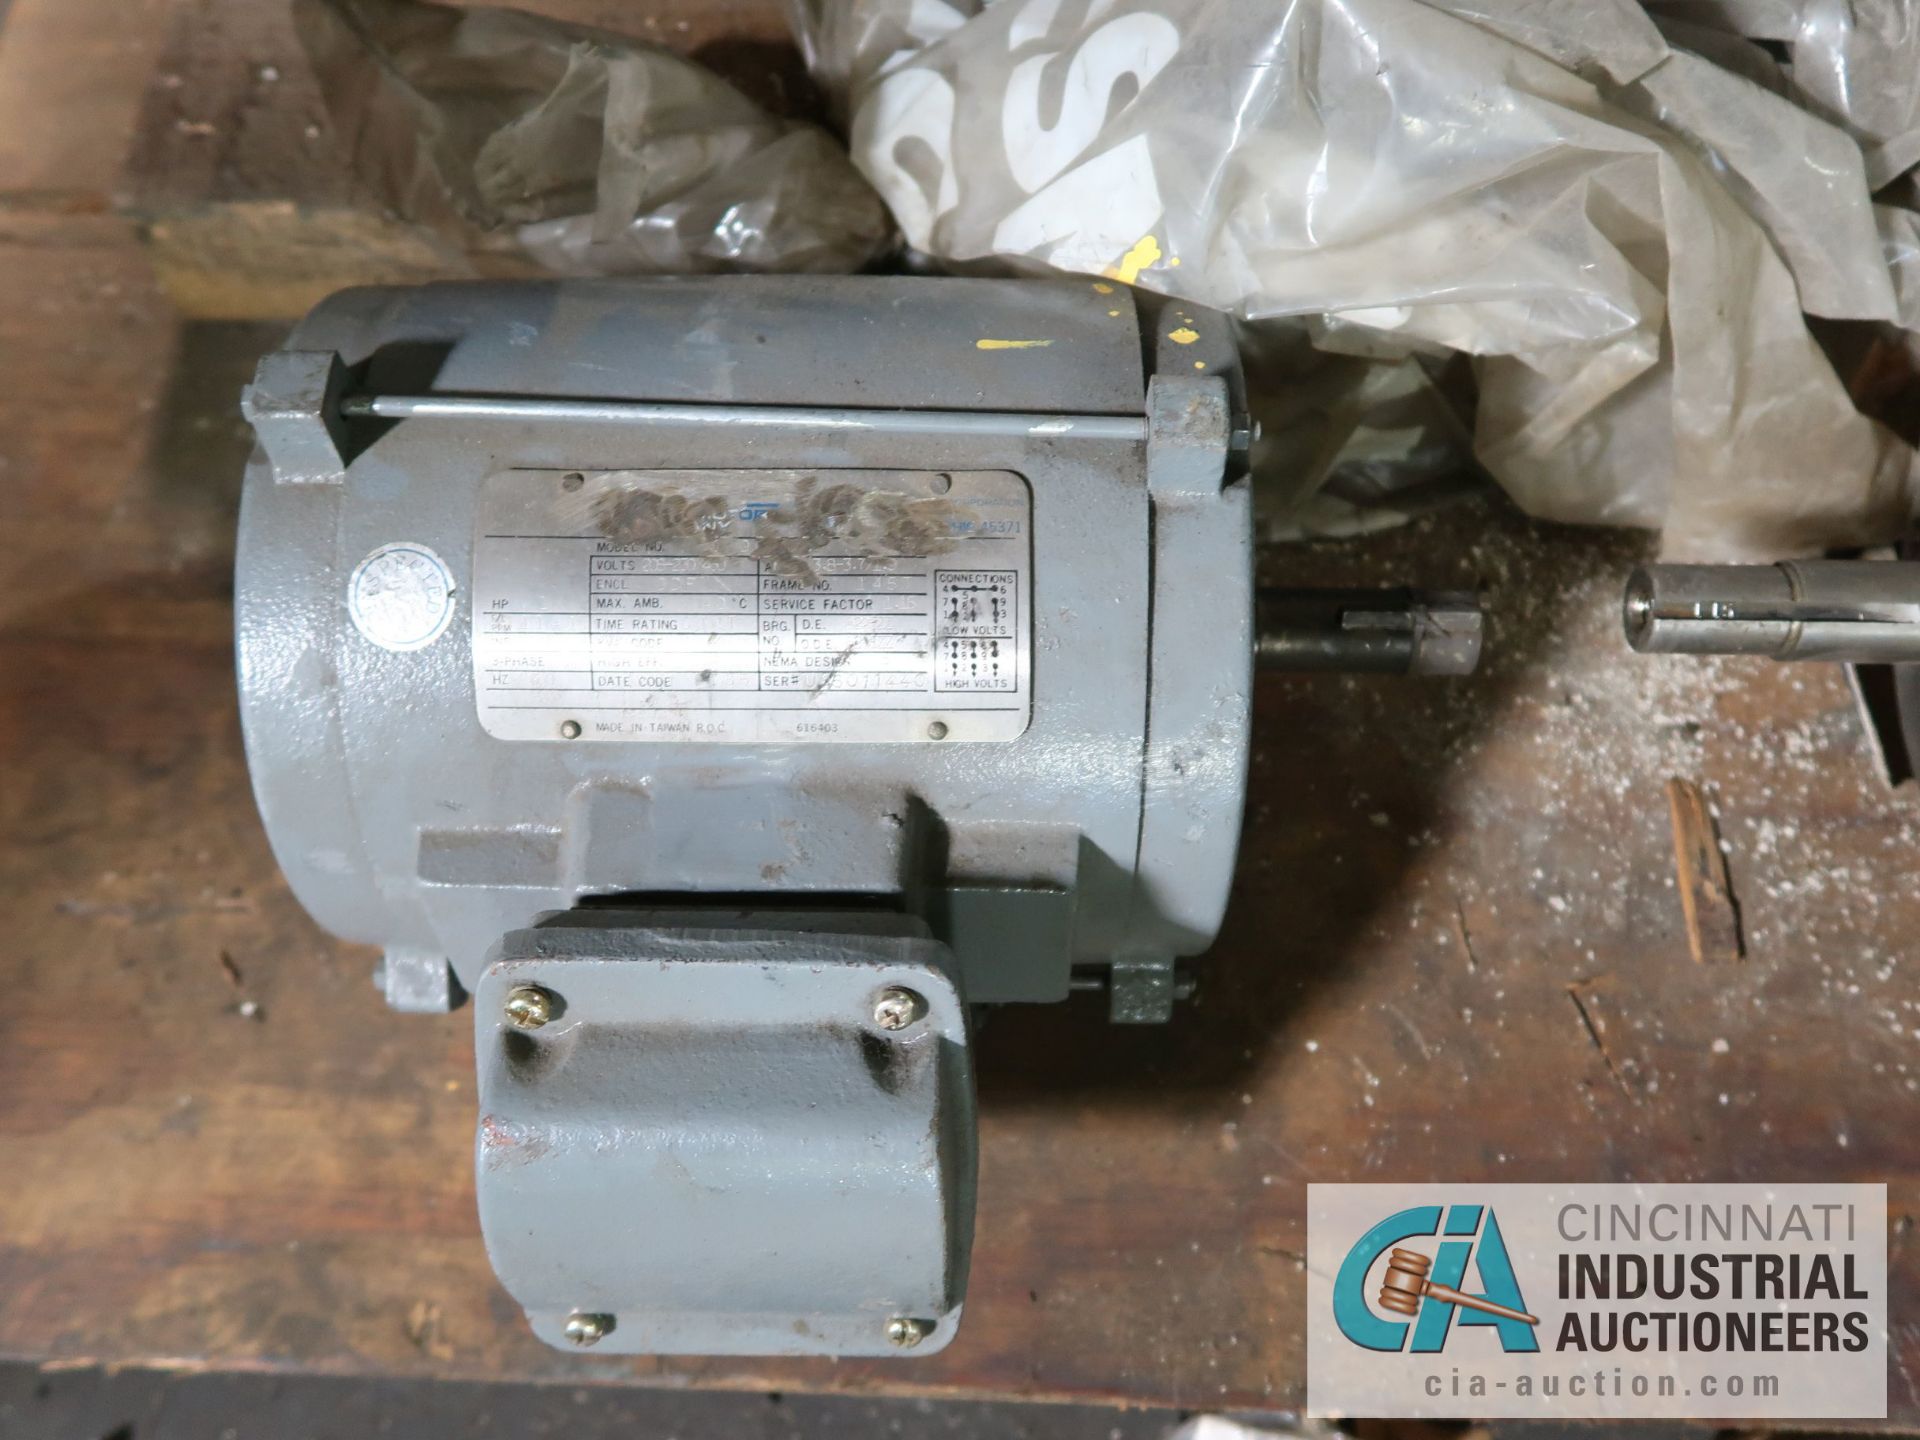 MOTORS ON SKID - 7-1/2 HP LINCOLN, 1 HP, 5 HP AND DEMAG GEAR REDUCER - Image 5 of 8